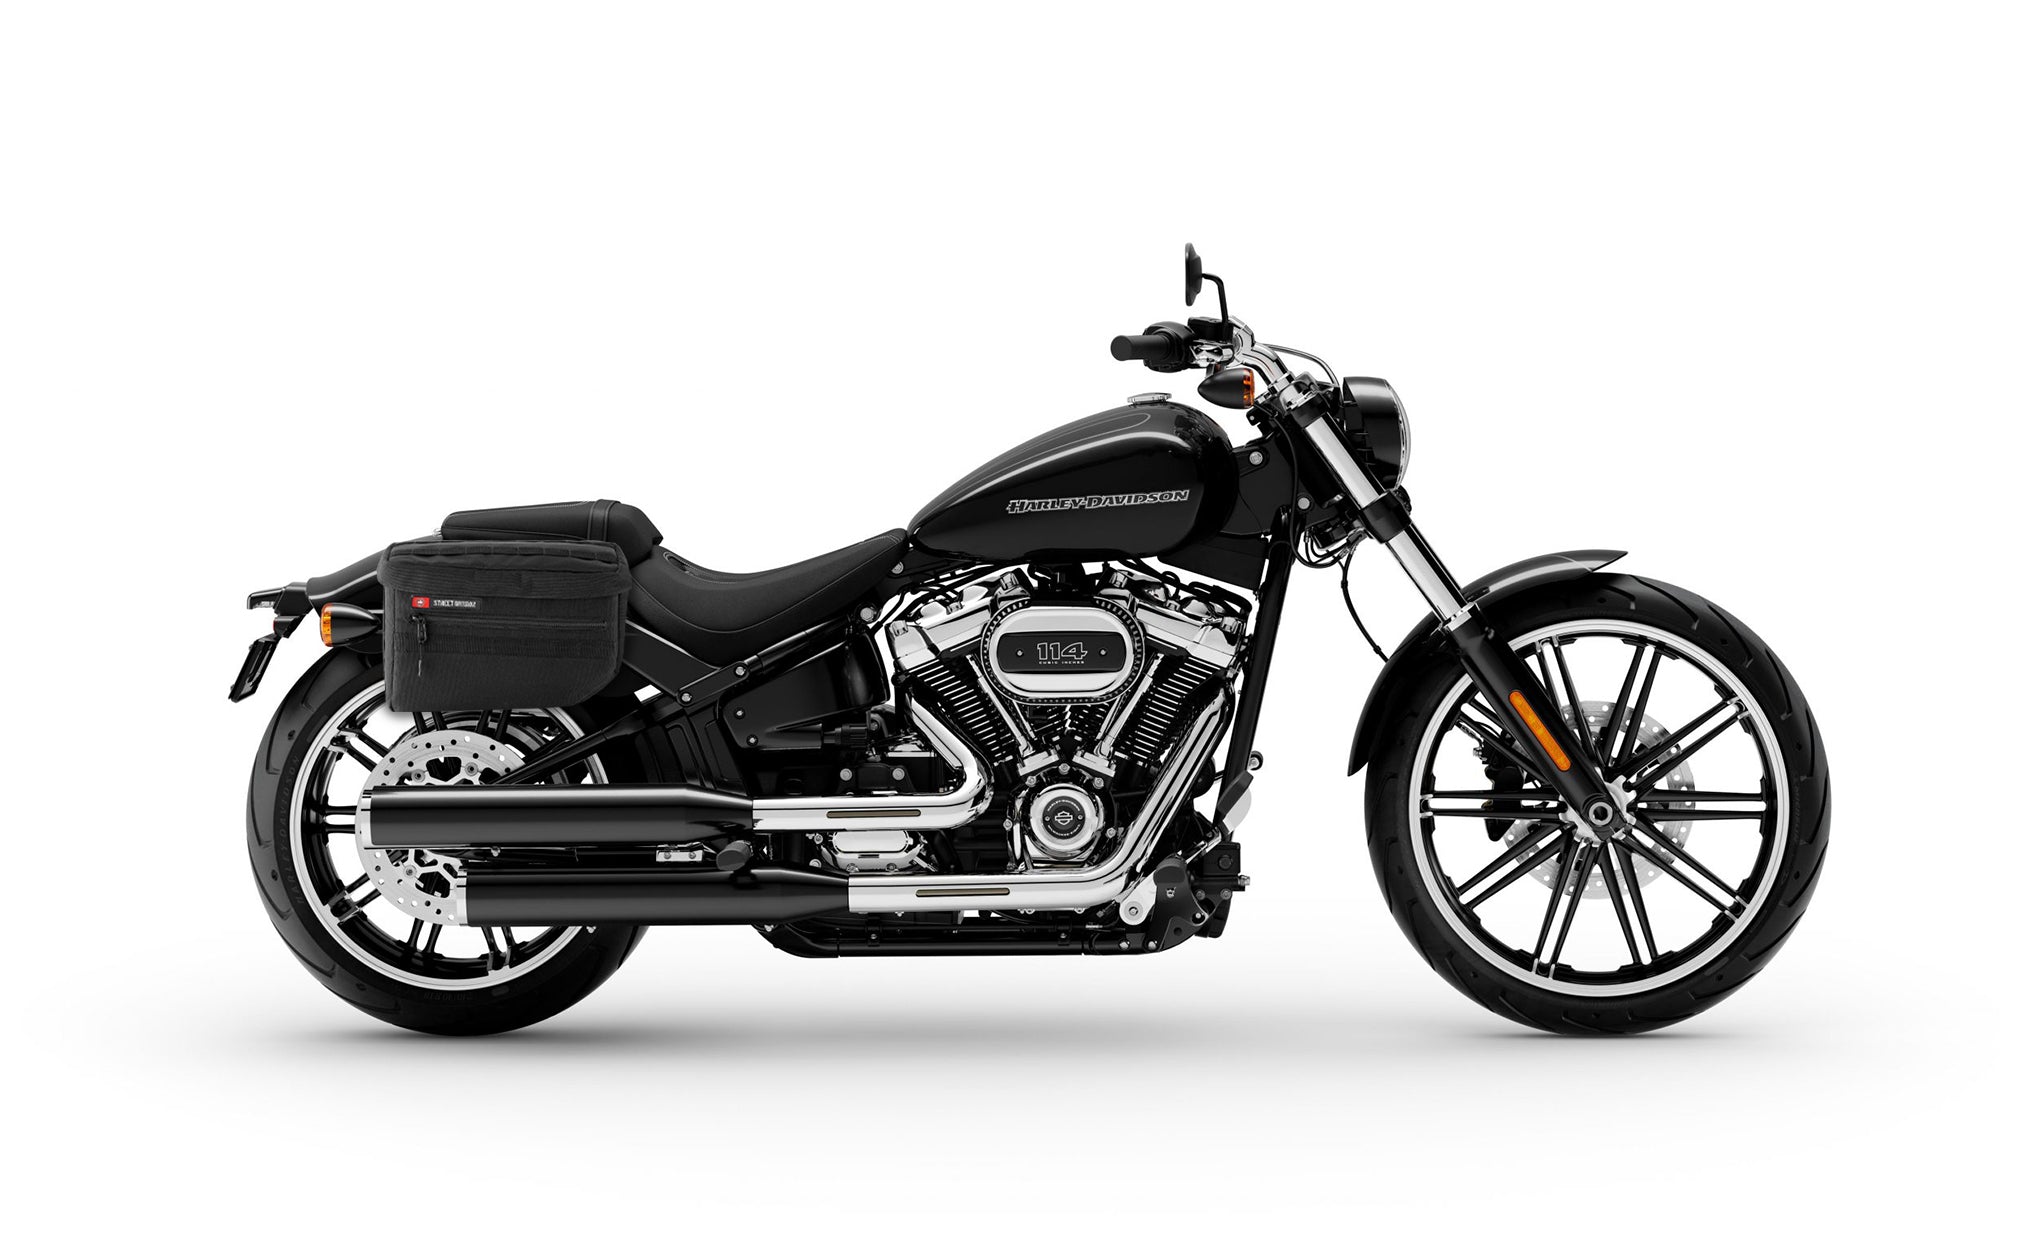 Viking Patriot Large Motorcycle Throw Over Saddlebags For Harley Softail Breakout 114 Fxbr S on Bike Photo @expand